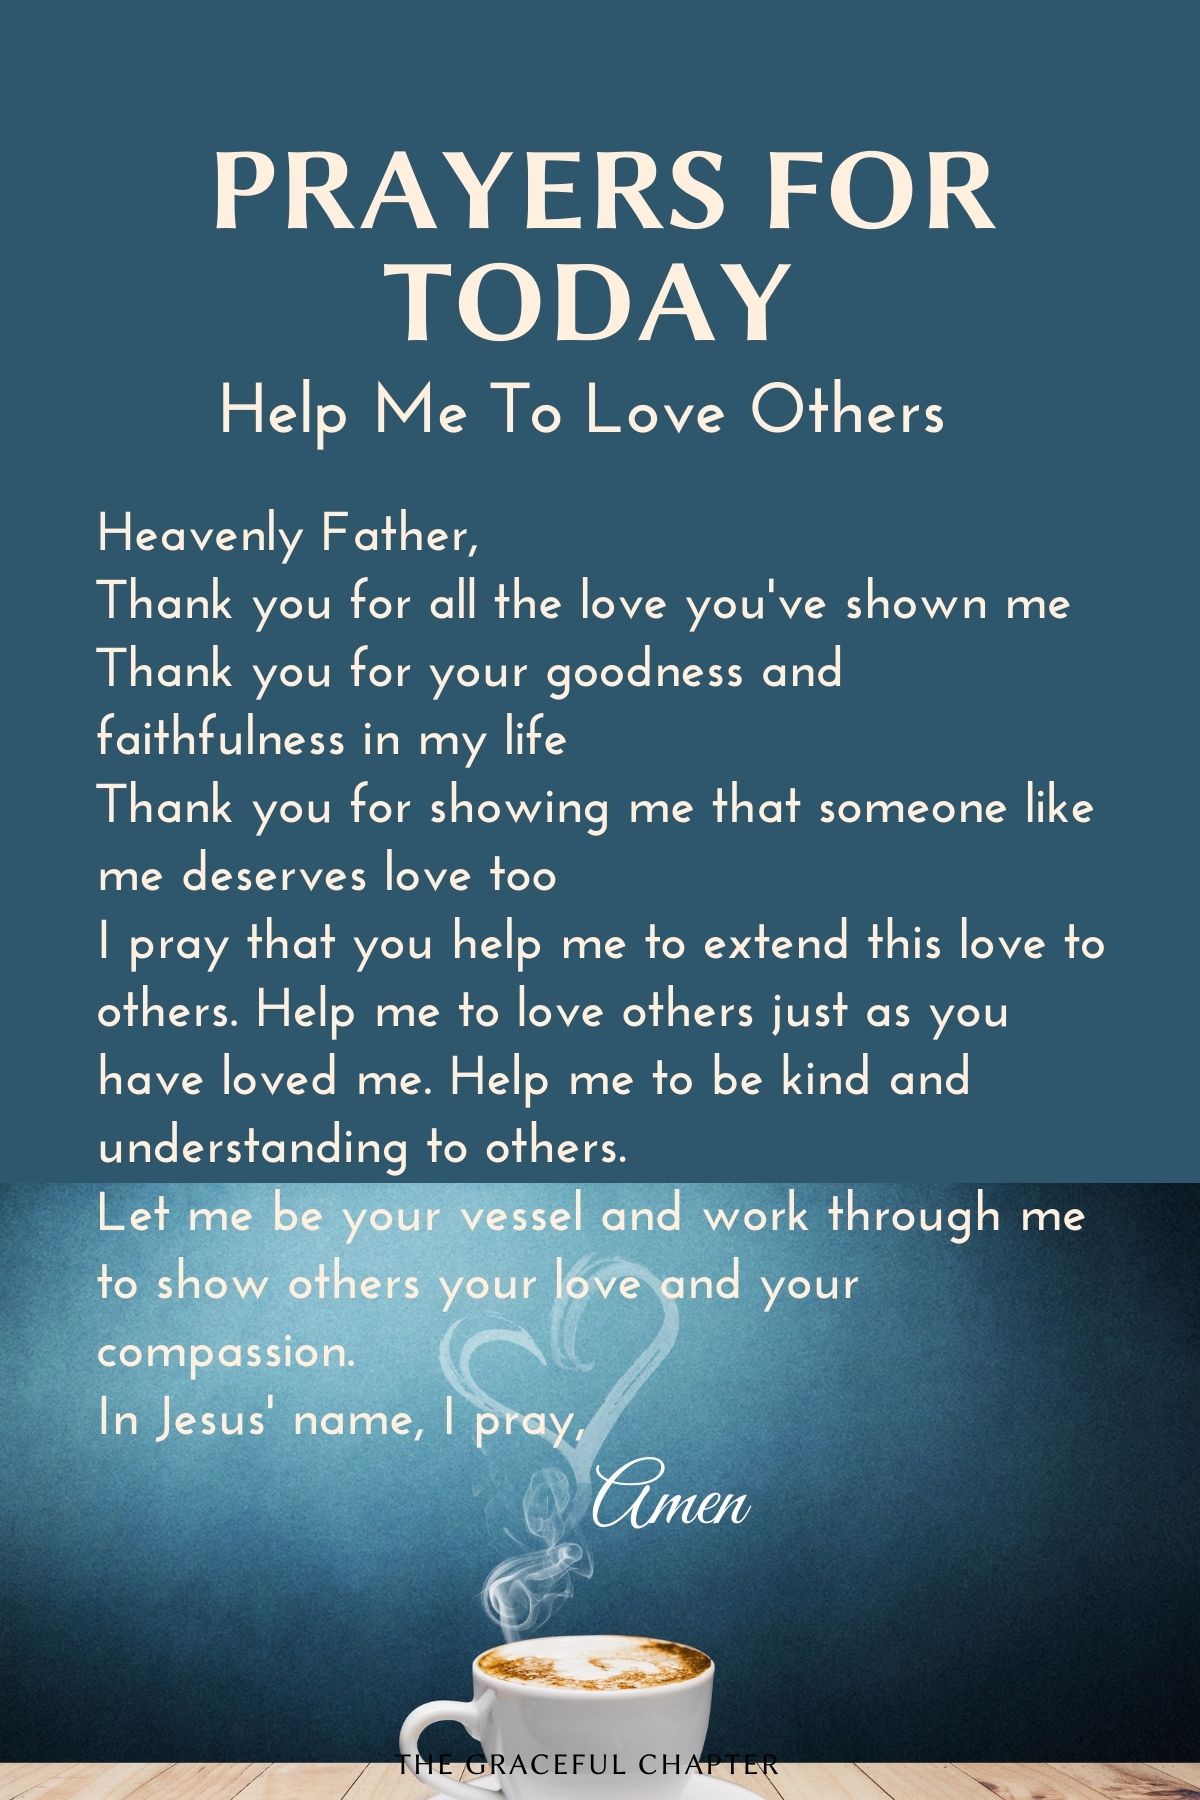 Prayers for today - Help me to love others